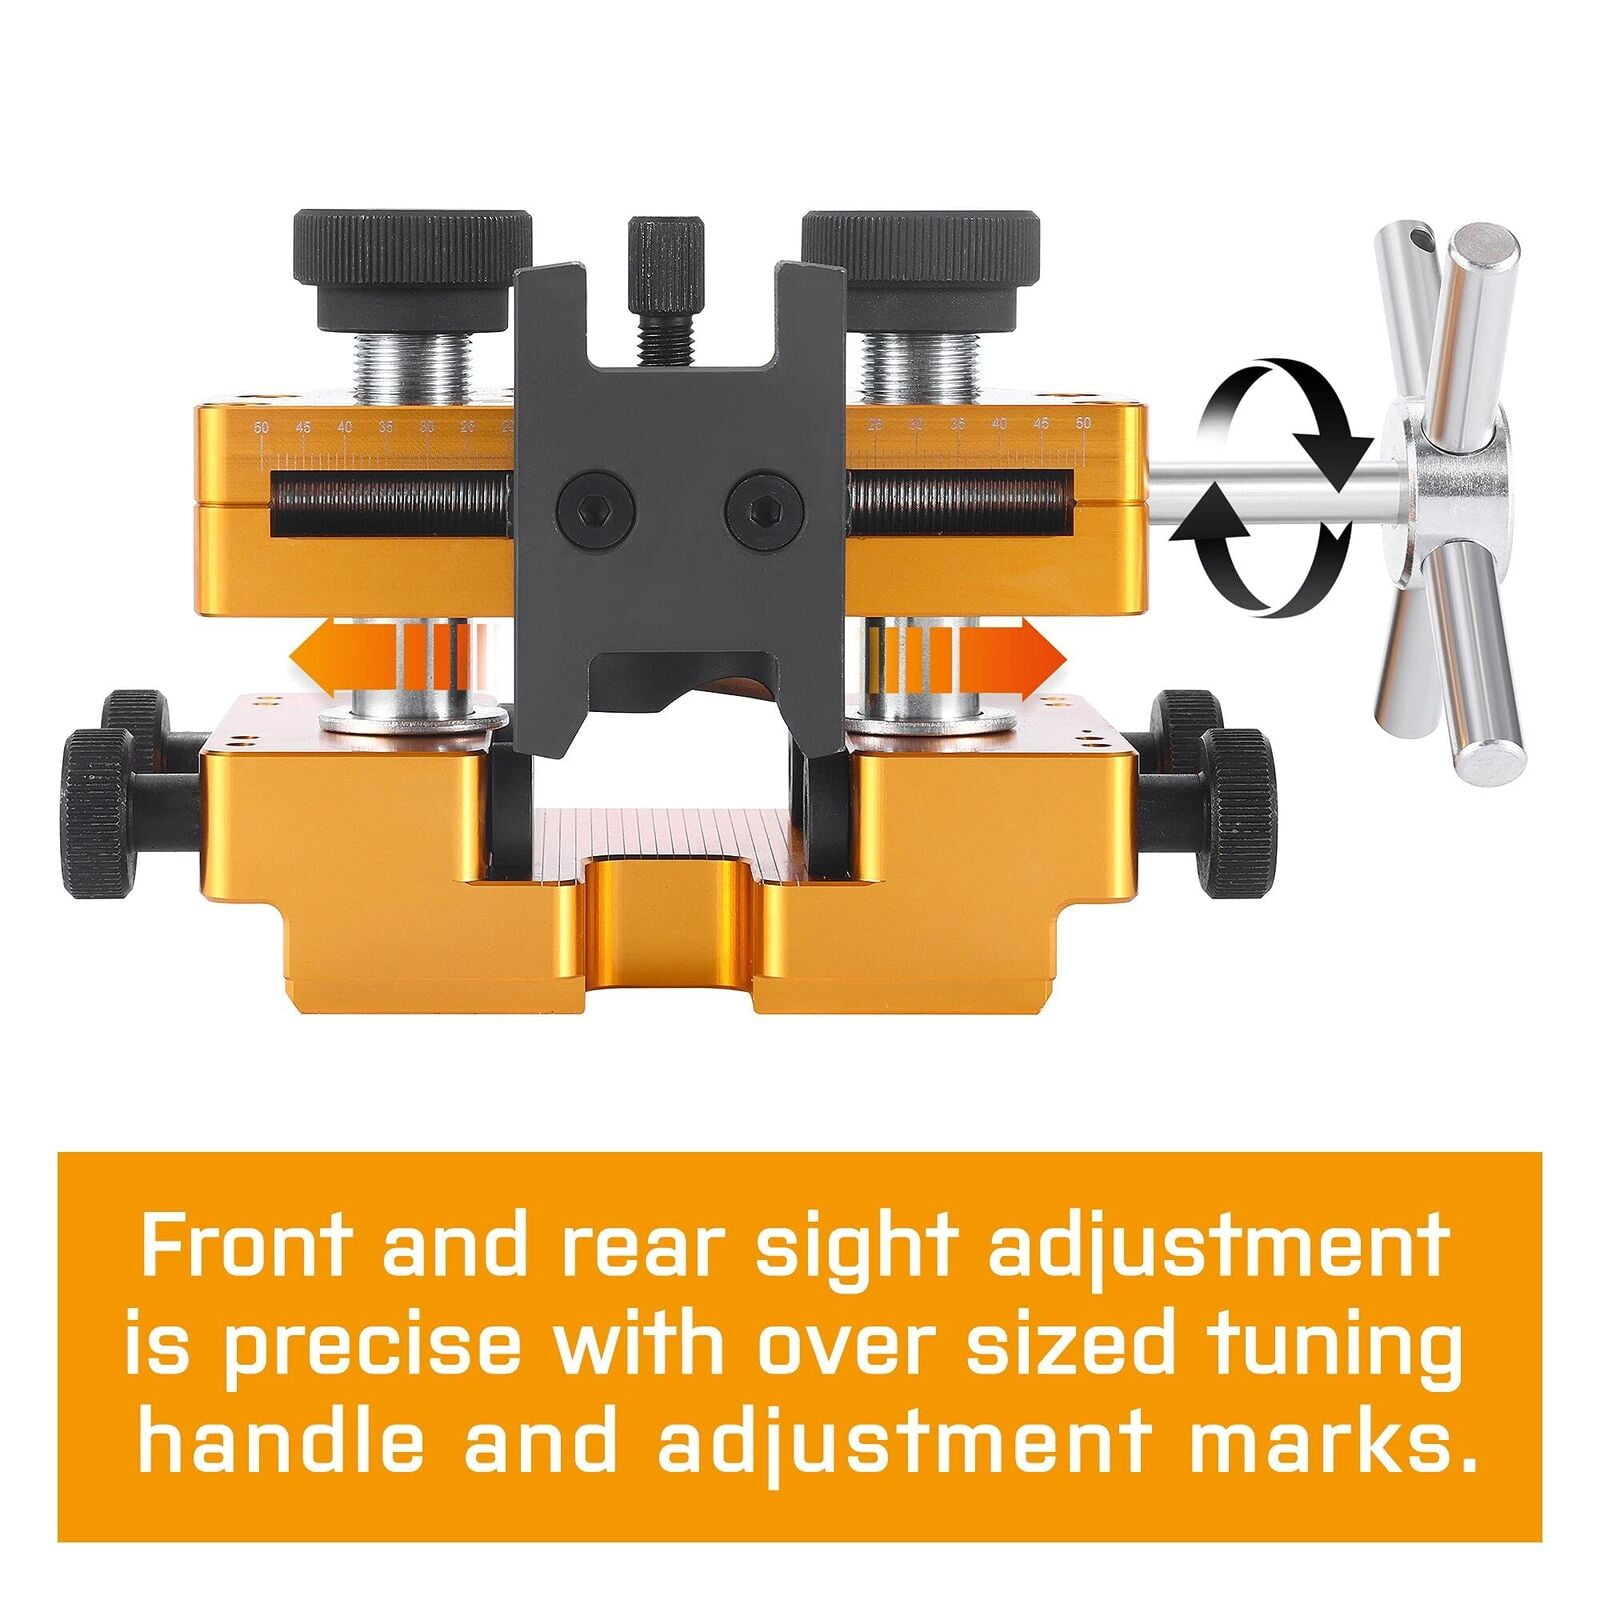 W WIREGEAR Sight Tool with Heavy-Duty Construction and Rotatable Sight  Prong